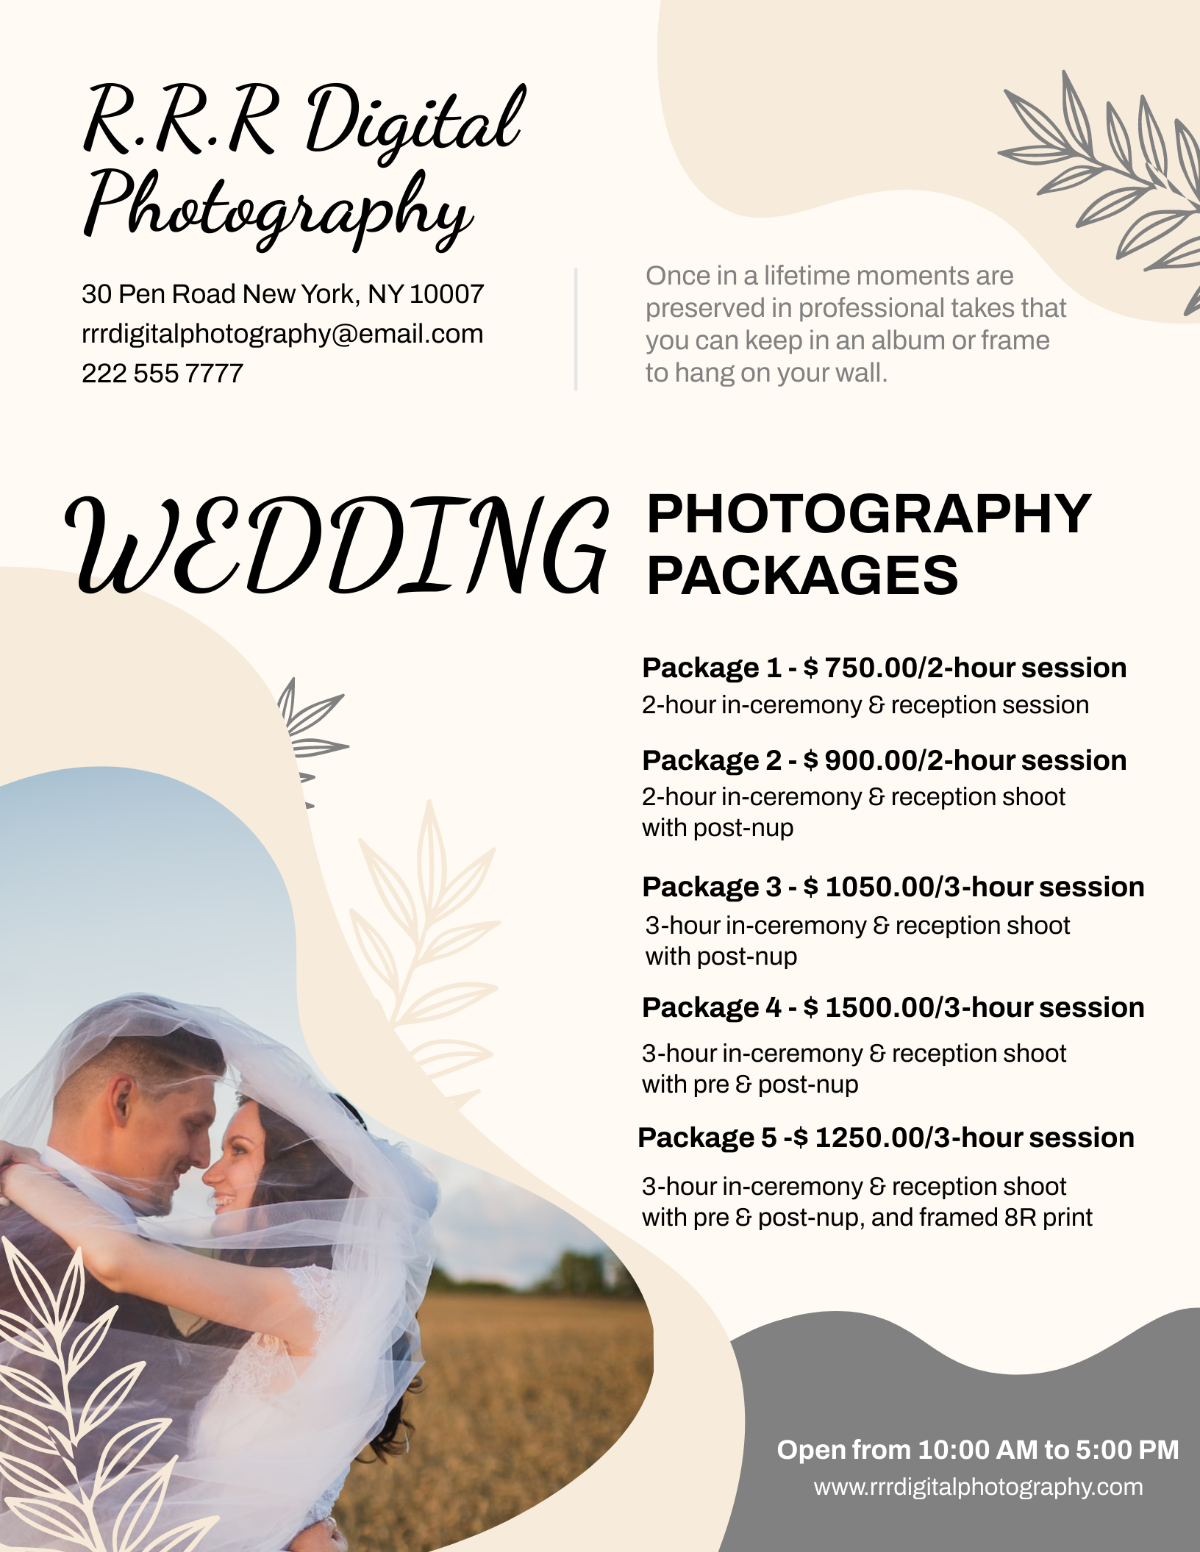 Wedding Photography Pricing Guide Template